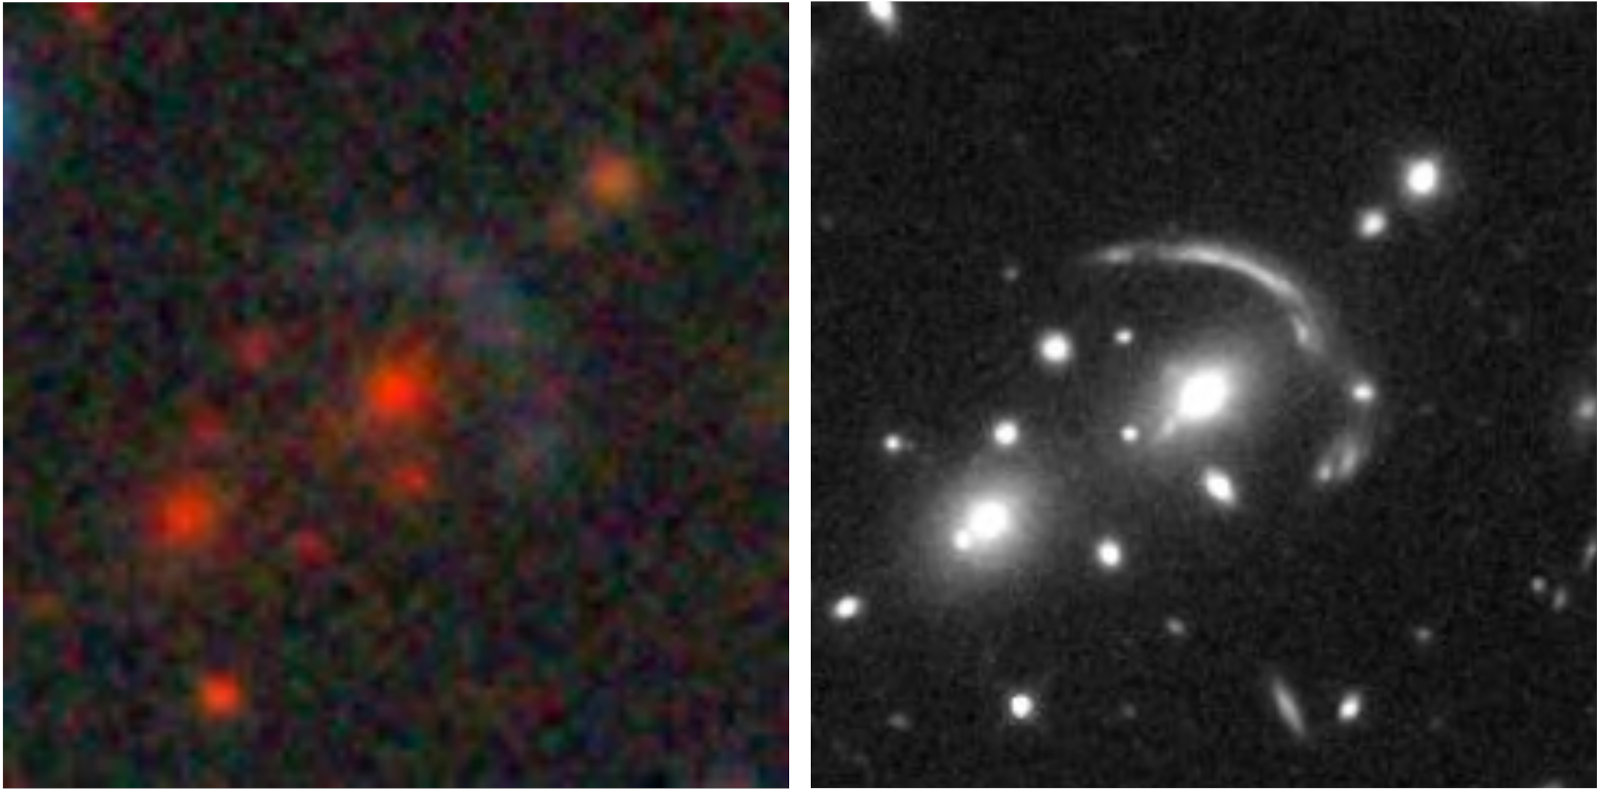 Image - A ground-based space image of a lensing candidate identified in the study (left), and a Hubble Space Telescope image confirming the lens (right). (Credit: Dark Energy Camera Legacy Survey, Hubble Space Telescope)